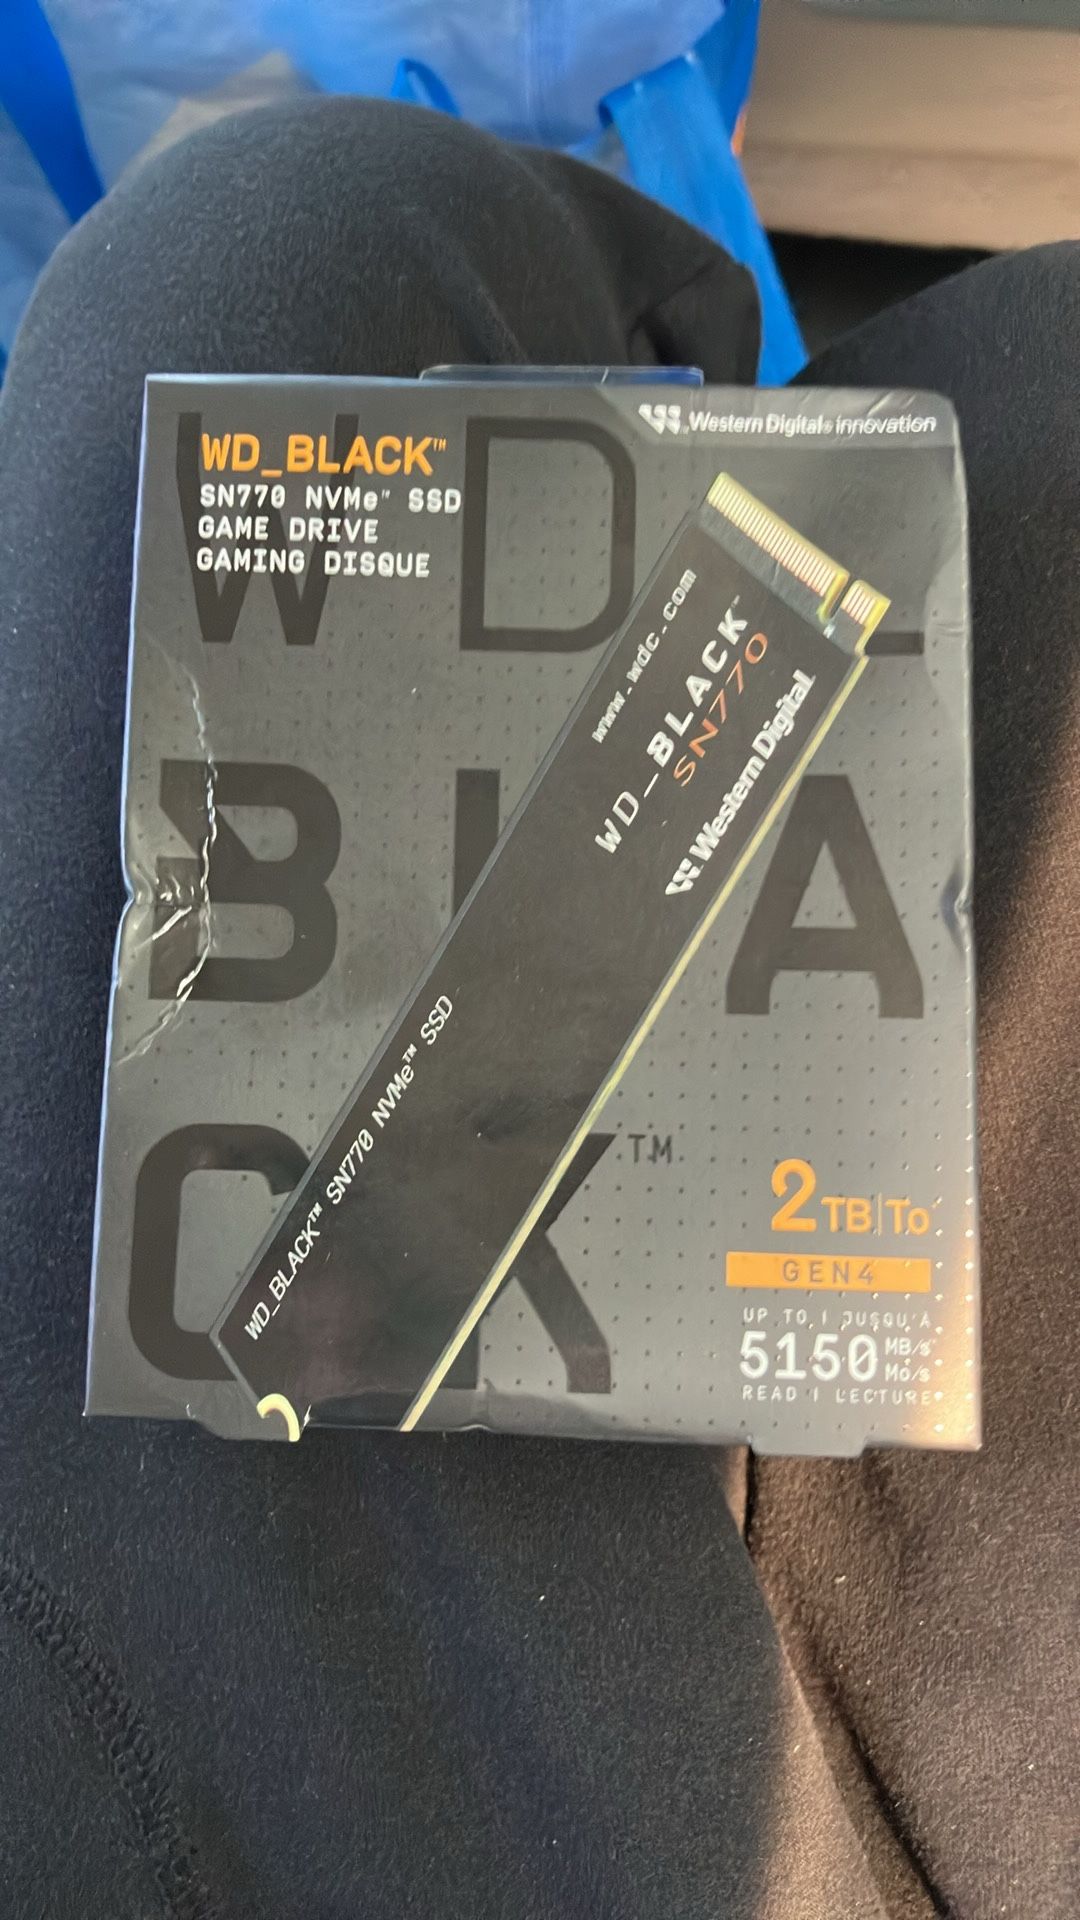 WD_BLACK 2TB SN770 NVMe SSD, Internal Gaming Solid State Drive 